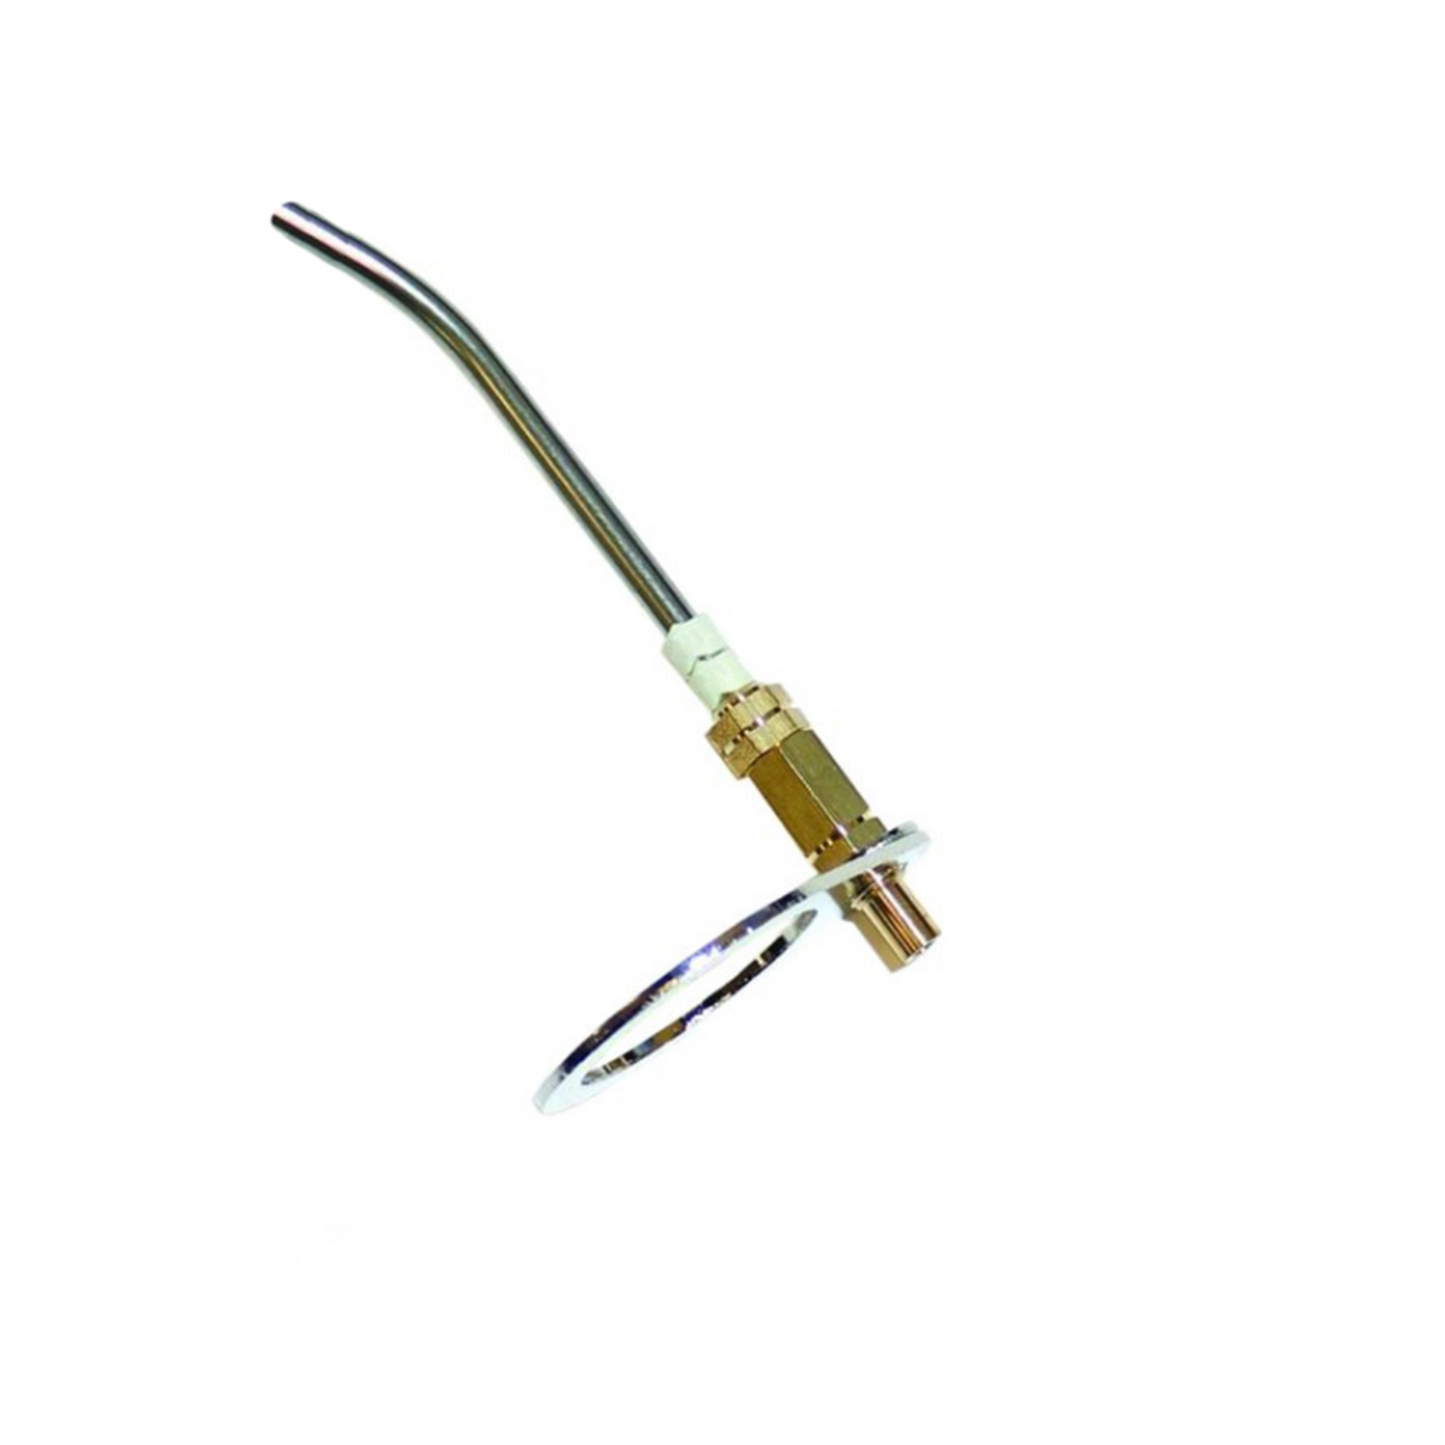 Hakko Products_ B3566 Feed pipe assembly 0.6MM_ Soldering Accessories_ Hakko Products